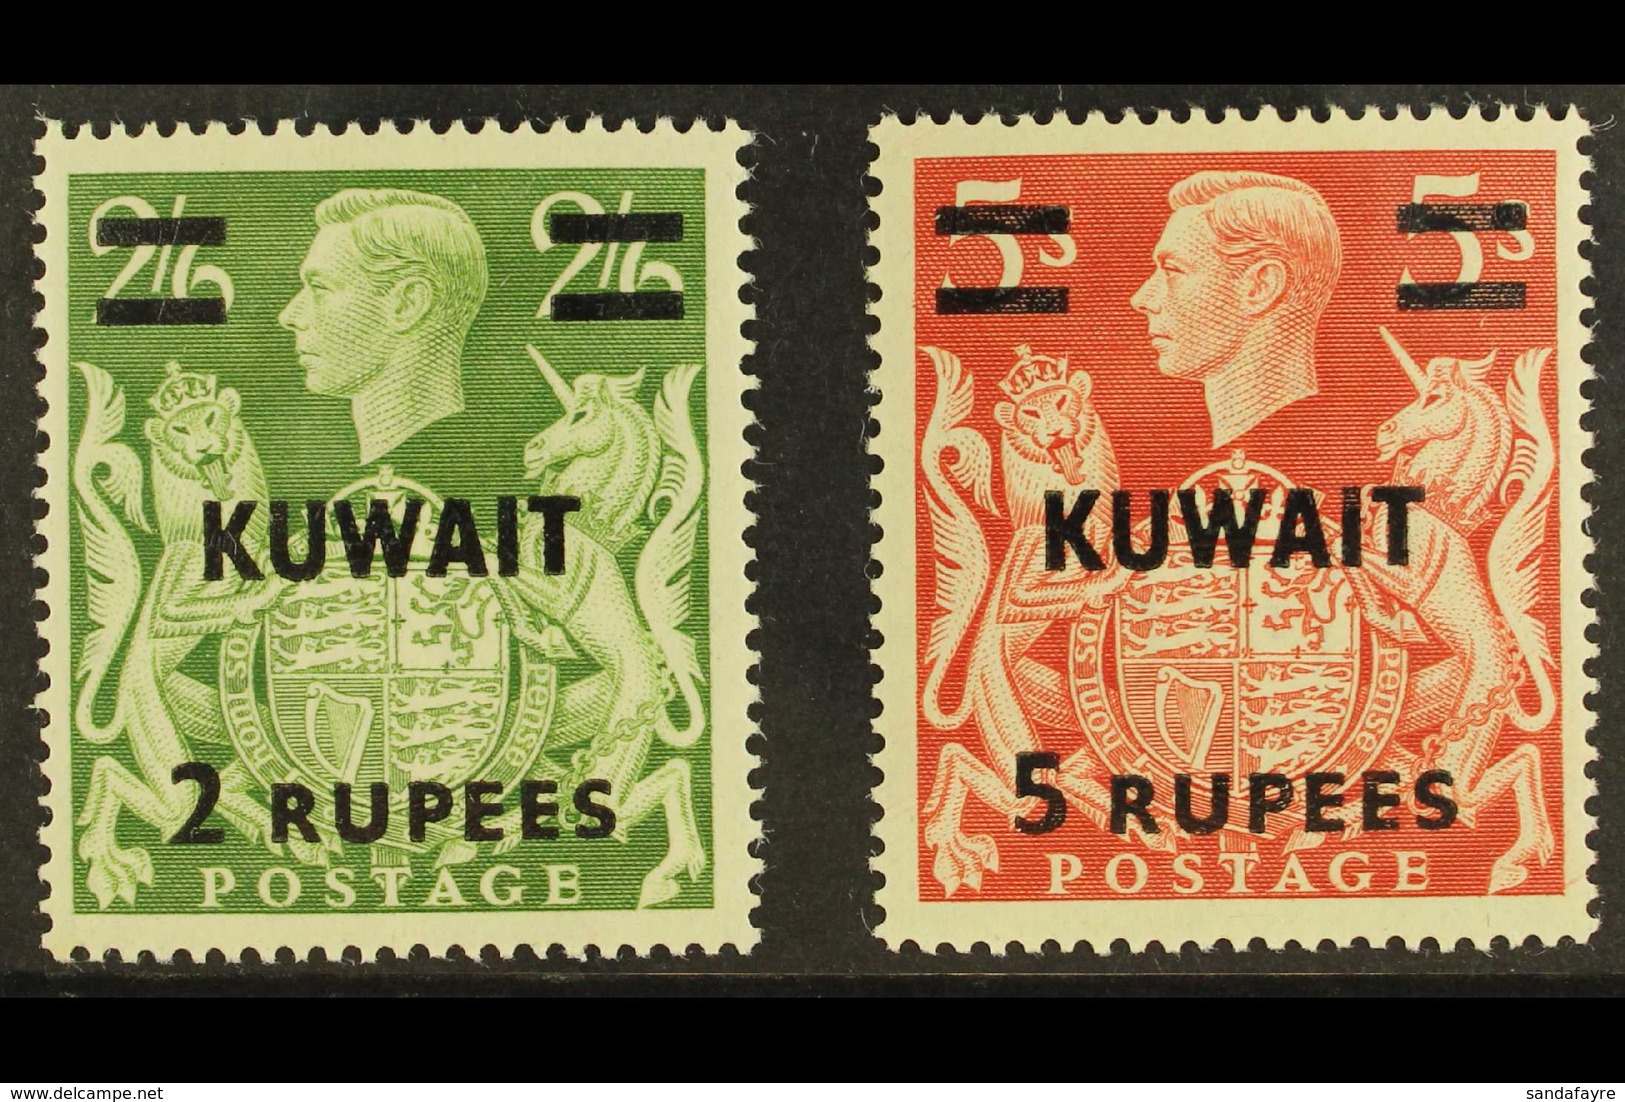 1948-49 2r On 2s6d Yellow-green & 5r On 5s Red Overprints, SG 72/73, Very Fine Mint, Both Showing 'T' GUIDE MARK Varieti - Kuwait